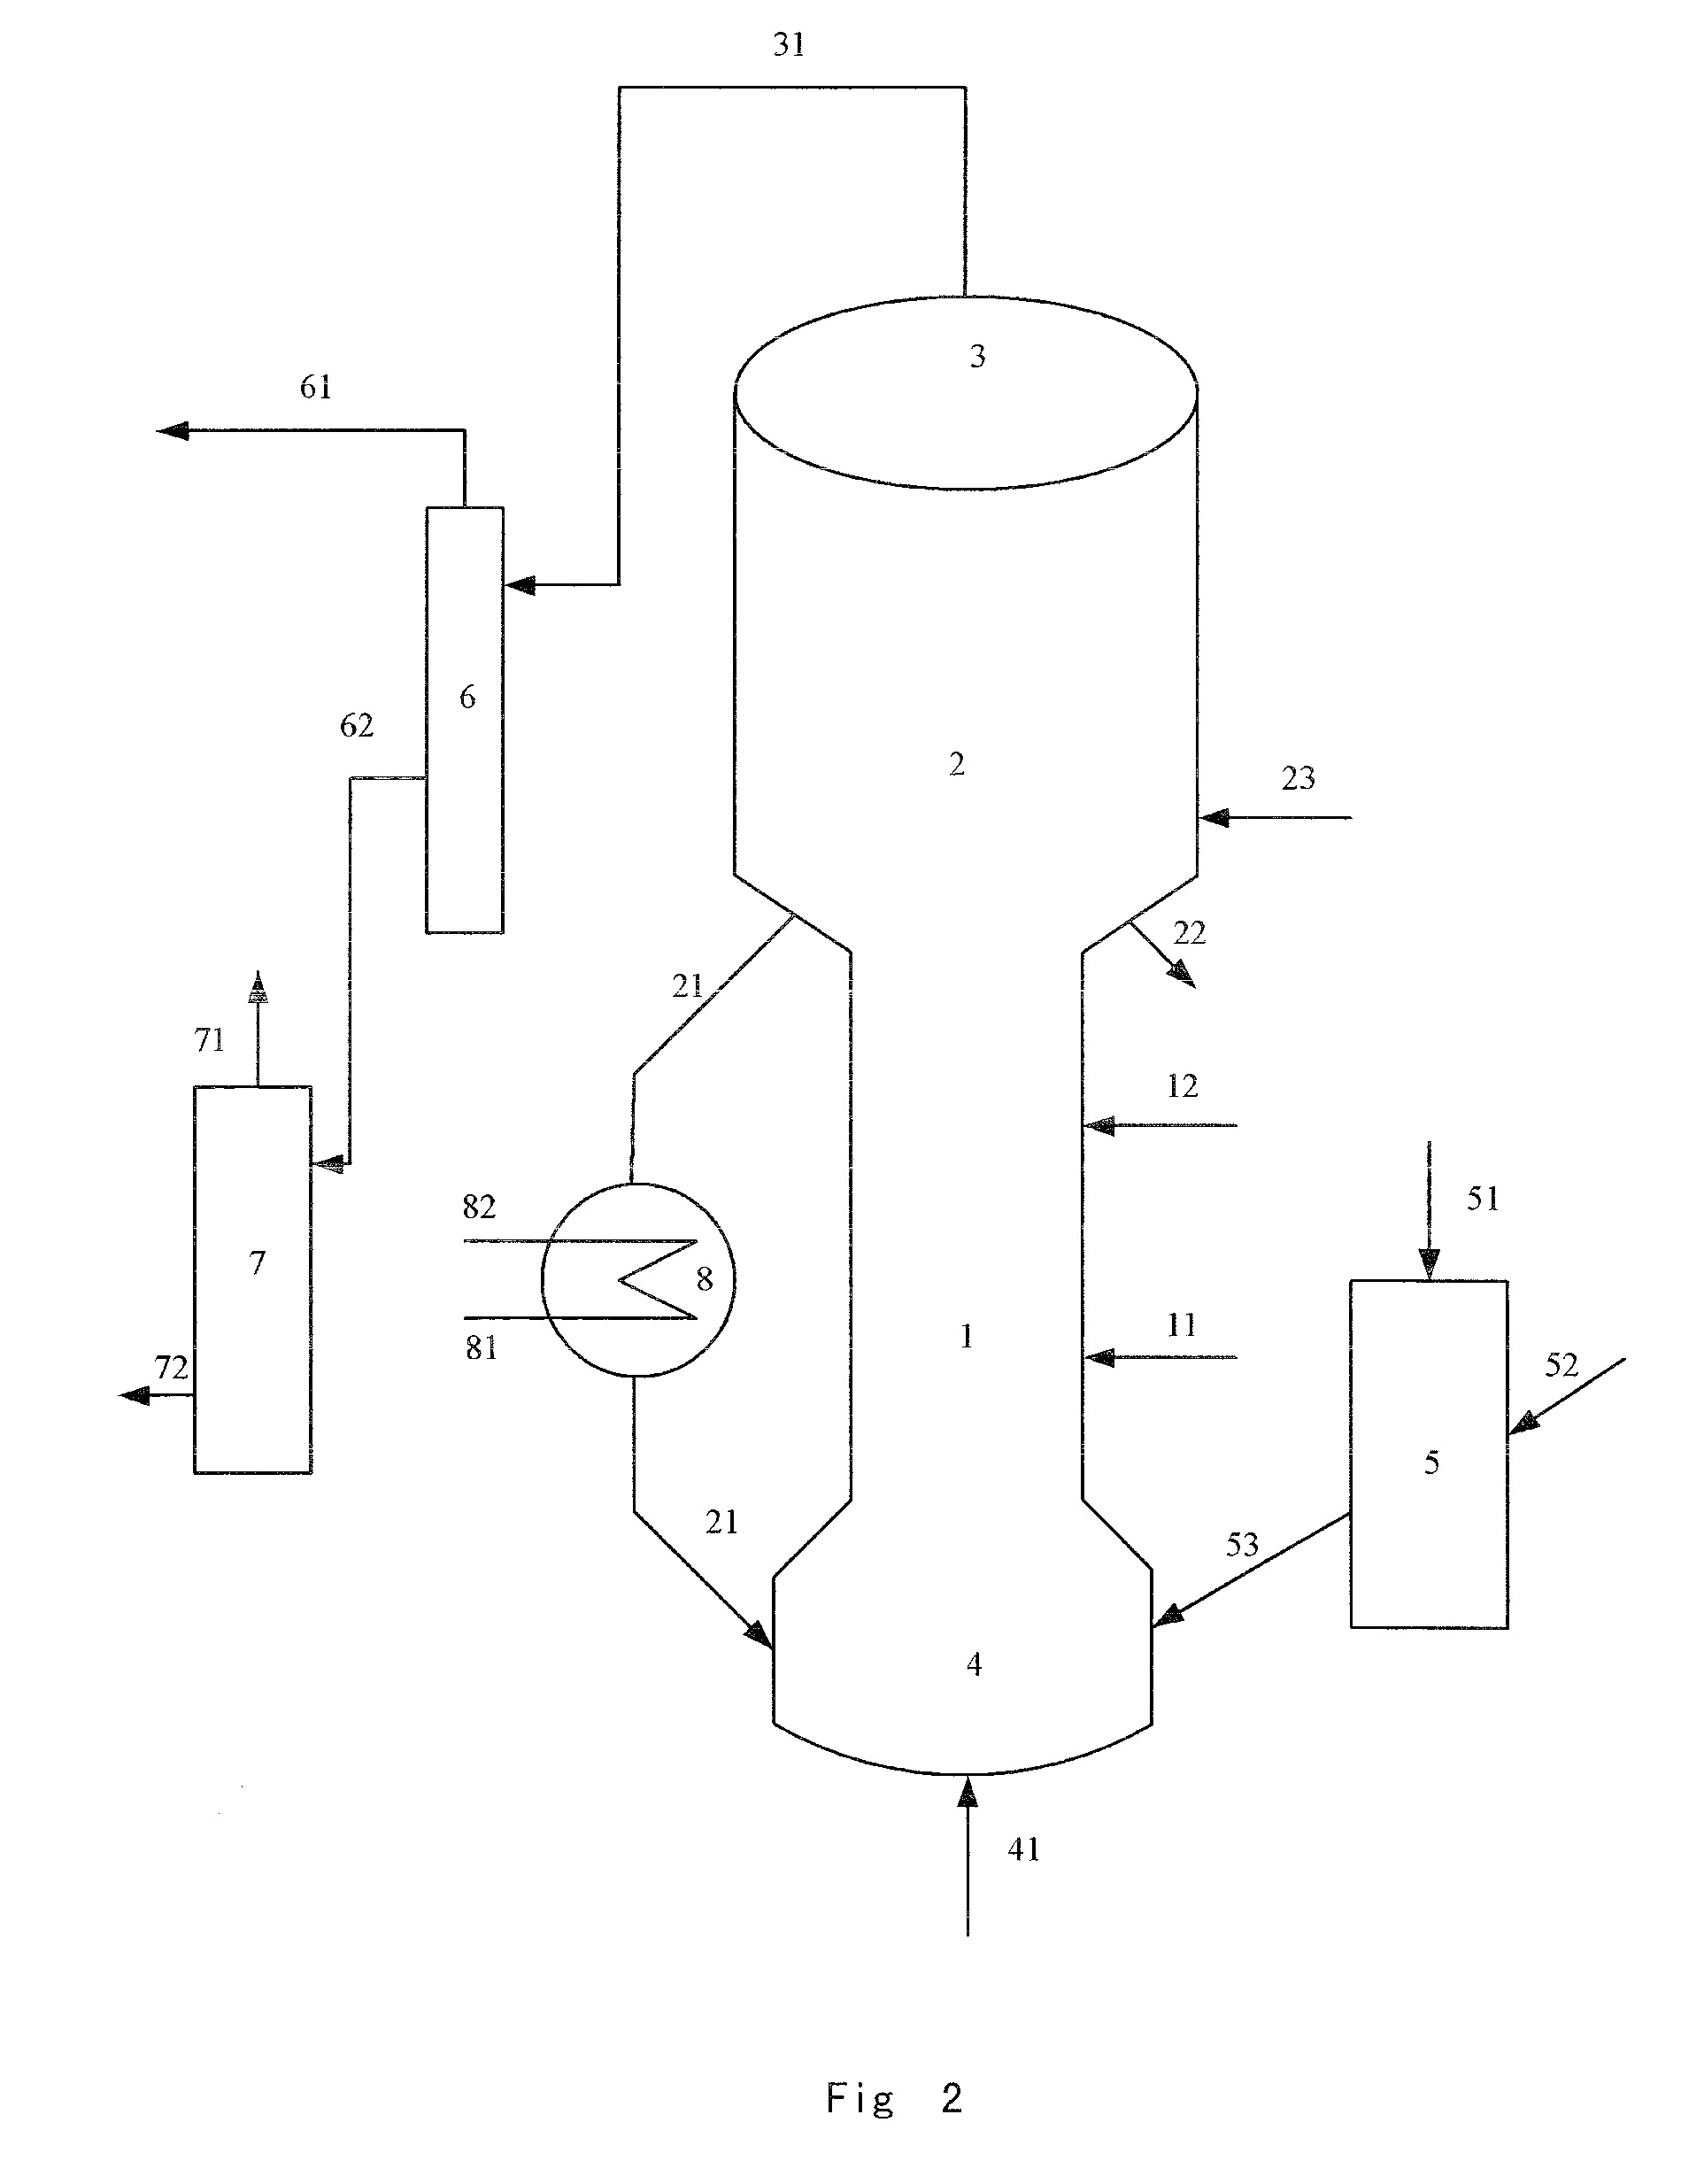 Fluidized catalytic process for production of dimethyl ether from methanol